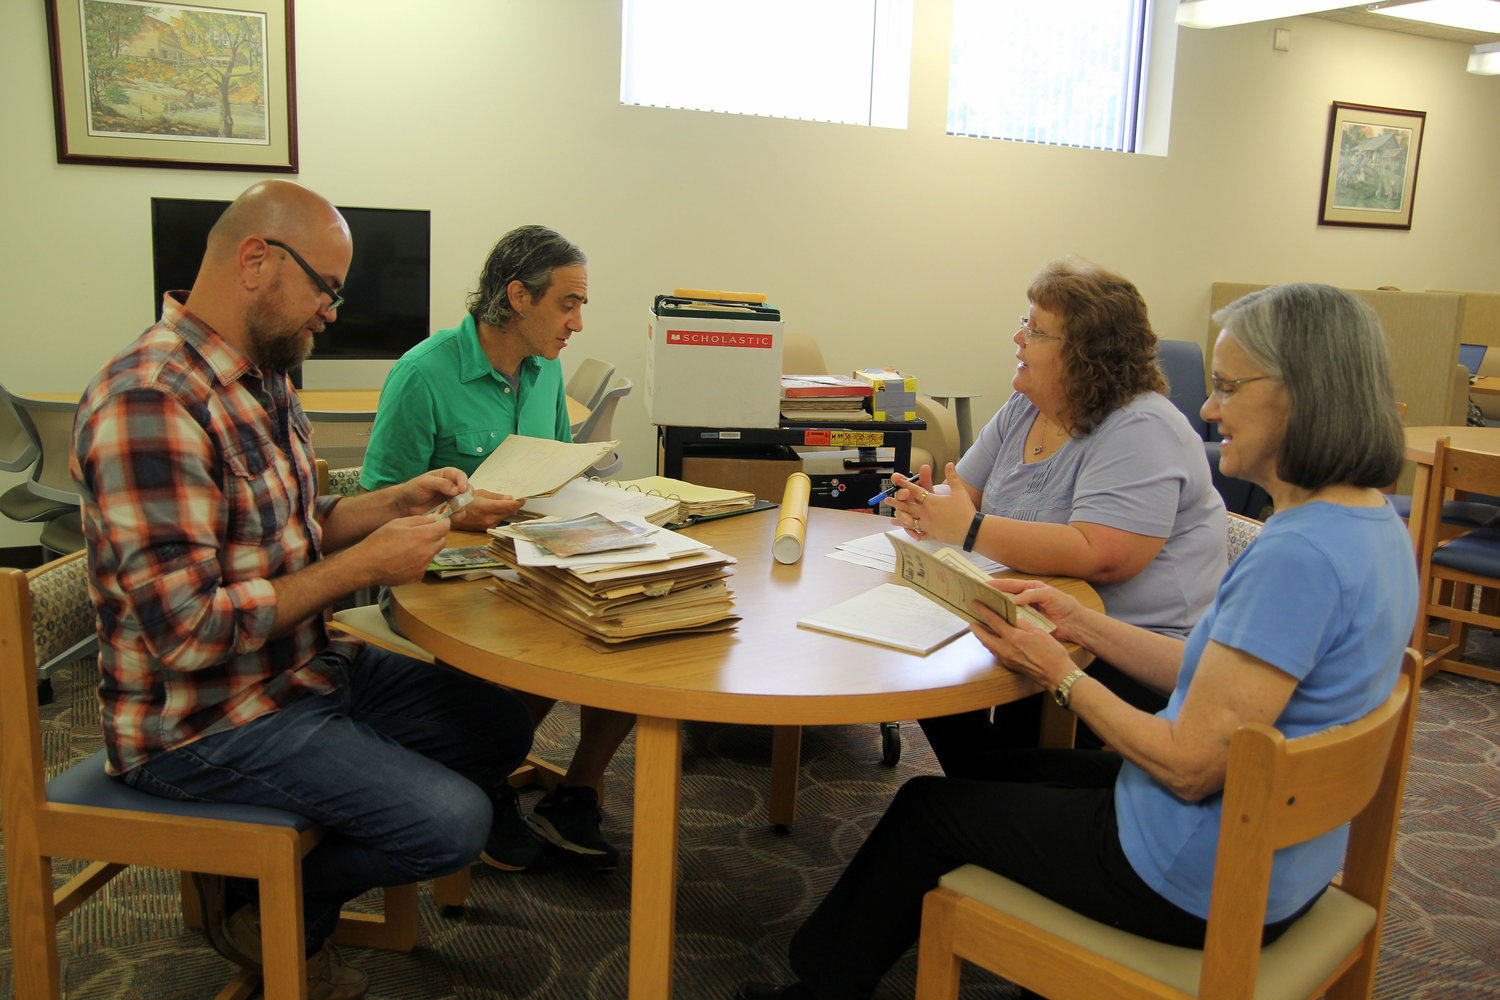 THESE MEMBERS OF THE OZARKS Heritage Resource Center advisory committee at Missouri State University-West Plains (MSU-WP) look through some of the historical materials that could be housed in the center when it opens in 2022 in the Garnett Library. From left are Professor of English Frank Priest, Associate Professor of History Dr. Jason McCollom, Garnett Library Director of Library Services Rebekah McKinney and Assistant Librarian Neva Parrott.